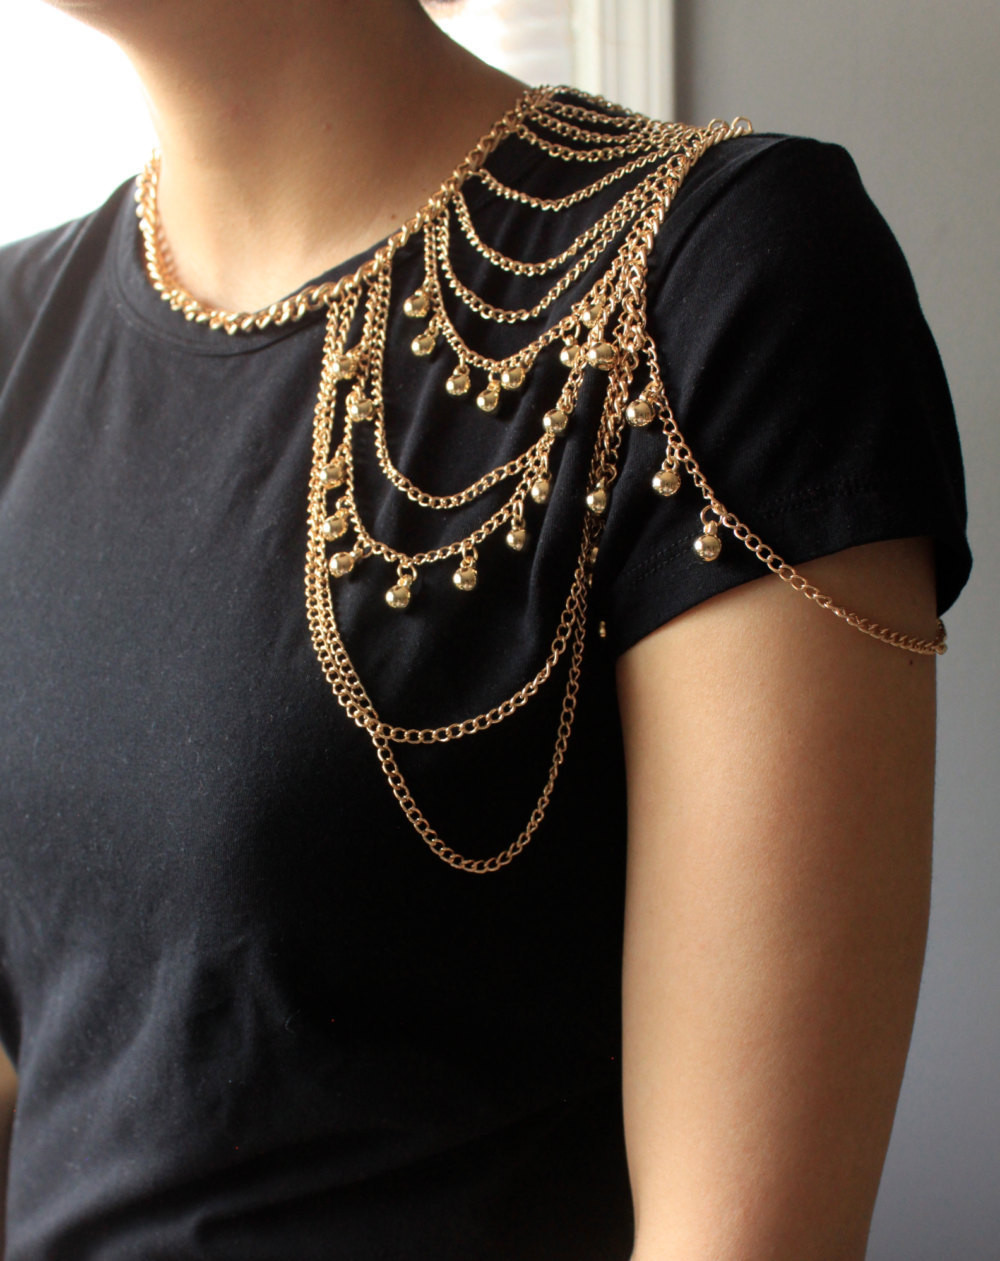 Body Jewelry Shoulder
 Shoulder Jewelry Gold Shoulder Chain Body by SusVintage on